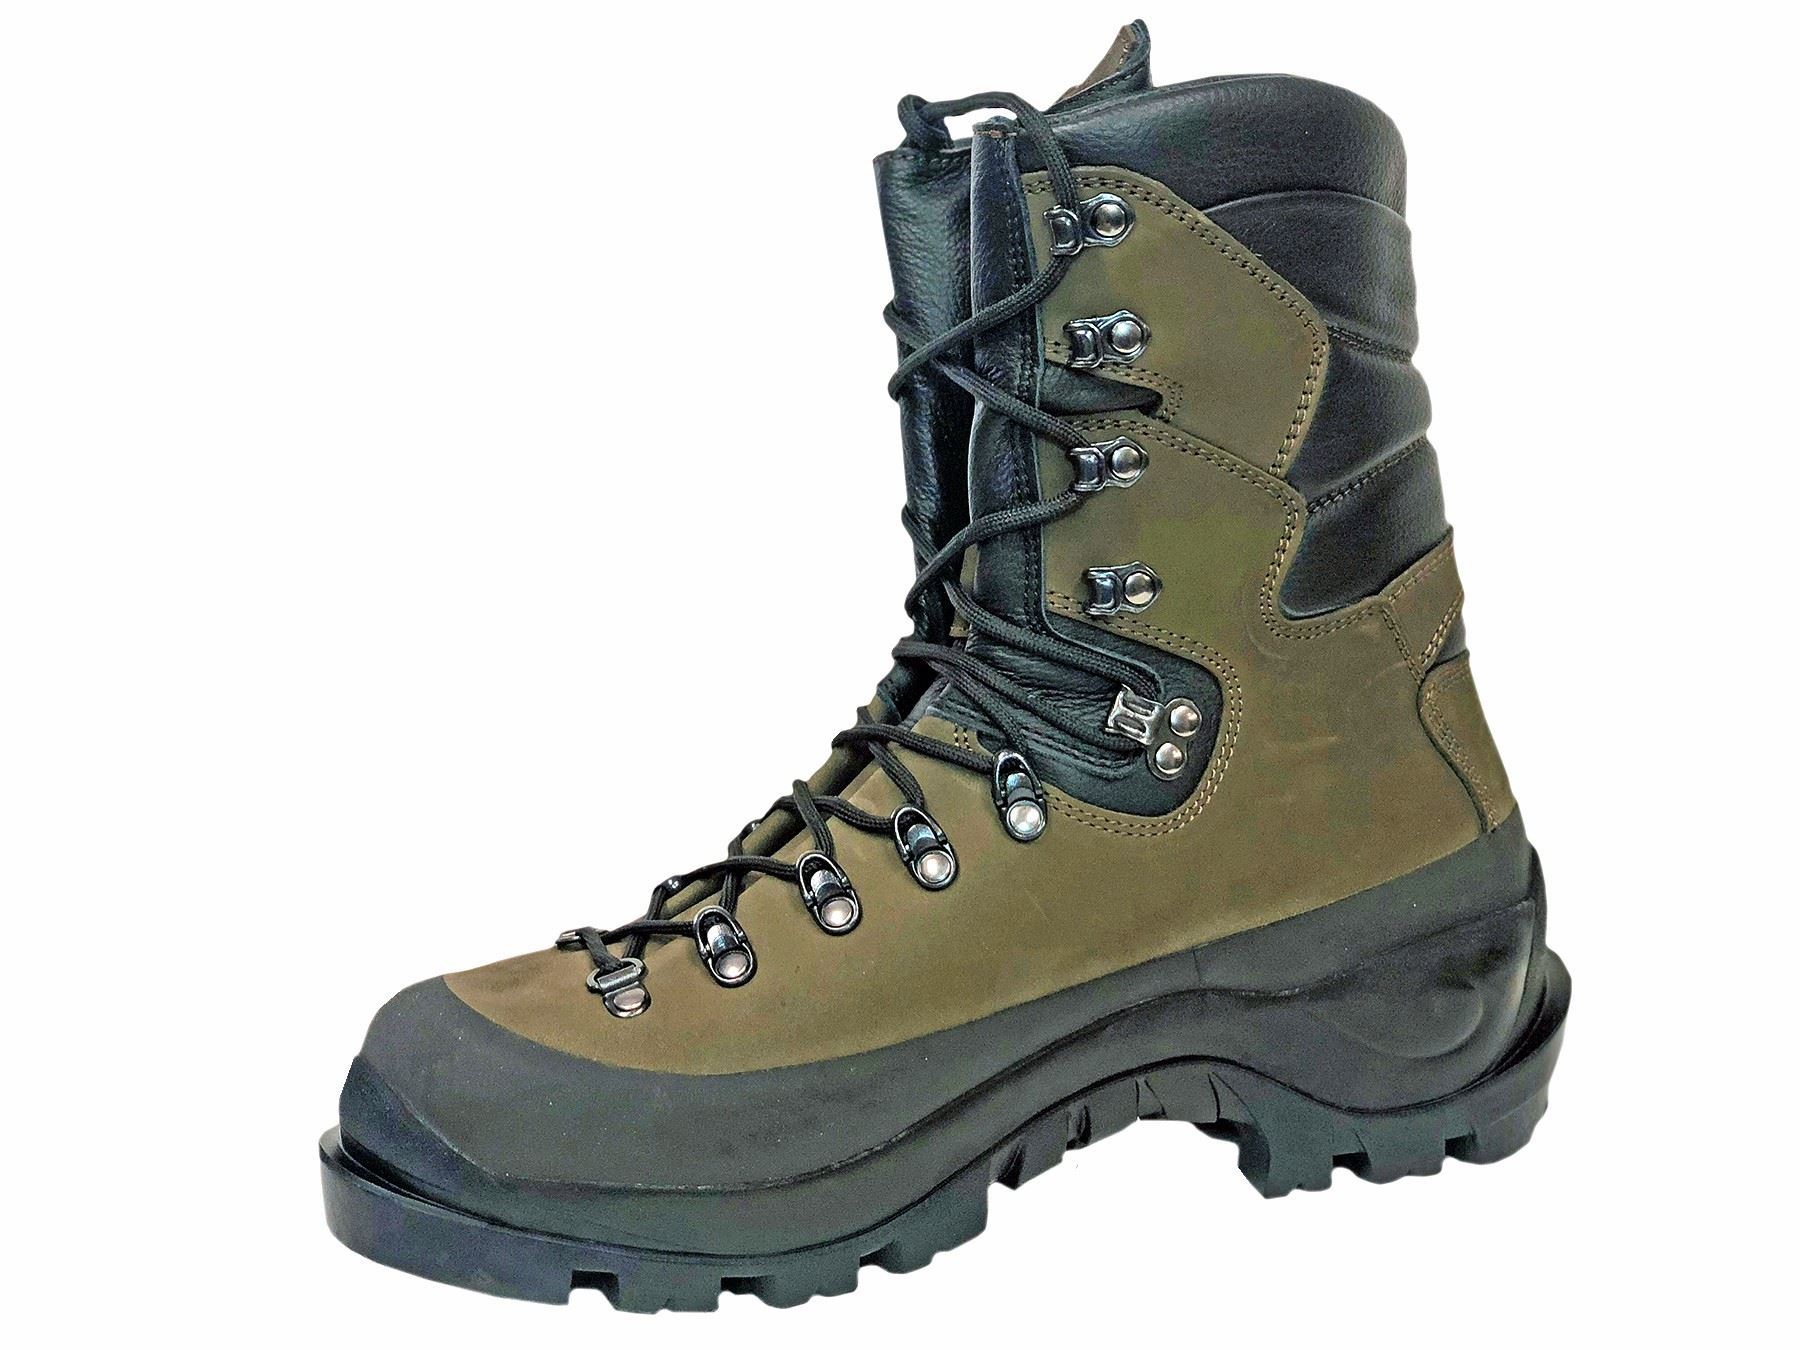 Hoffman 8 Inch Classic Lineman Composite Toe Work Boots from Columbia Safety